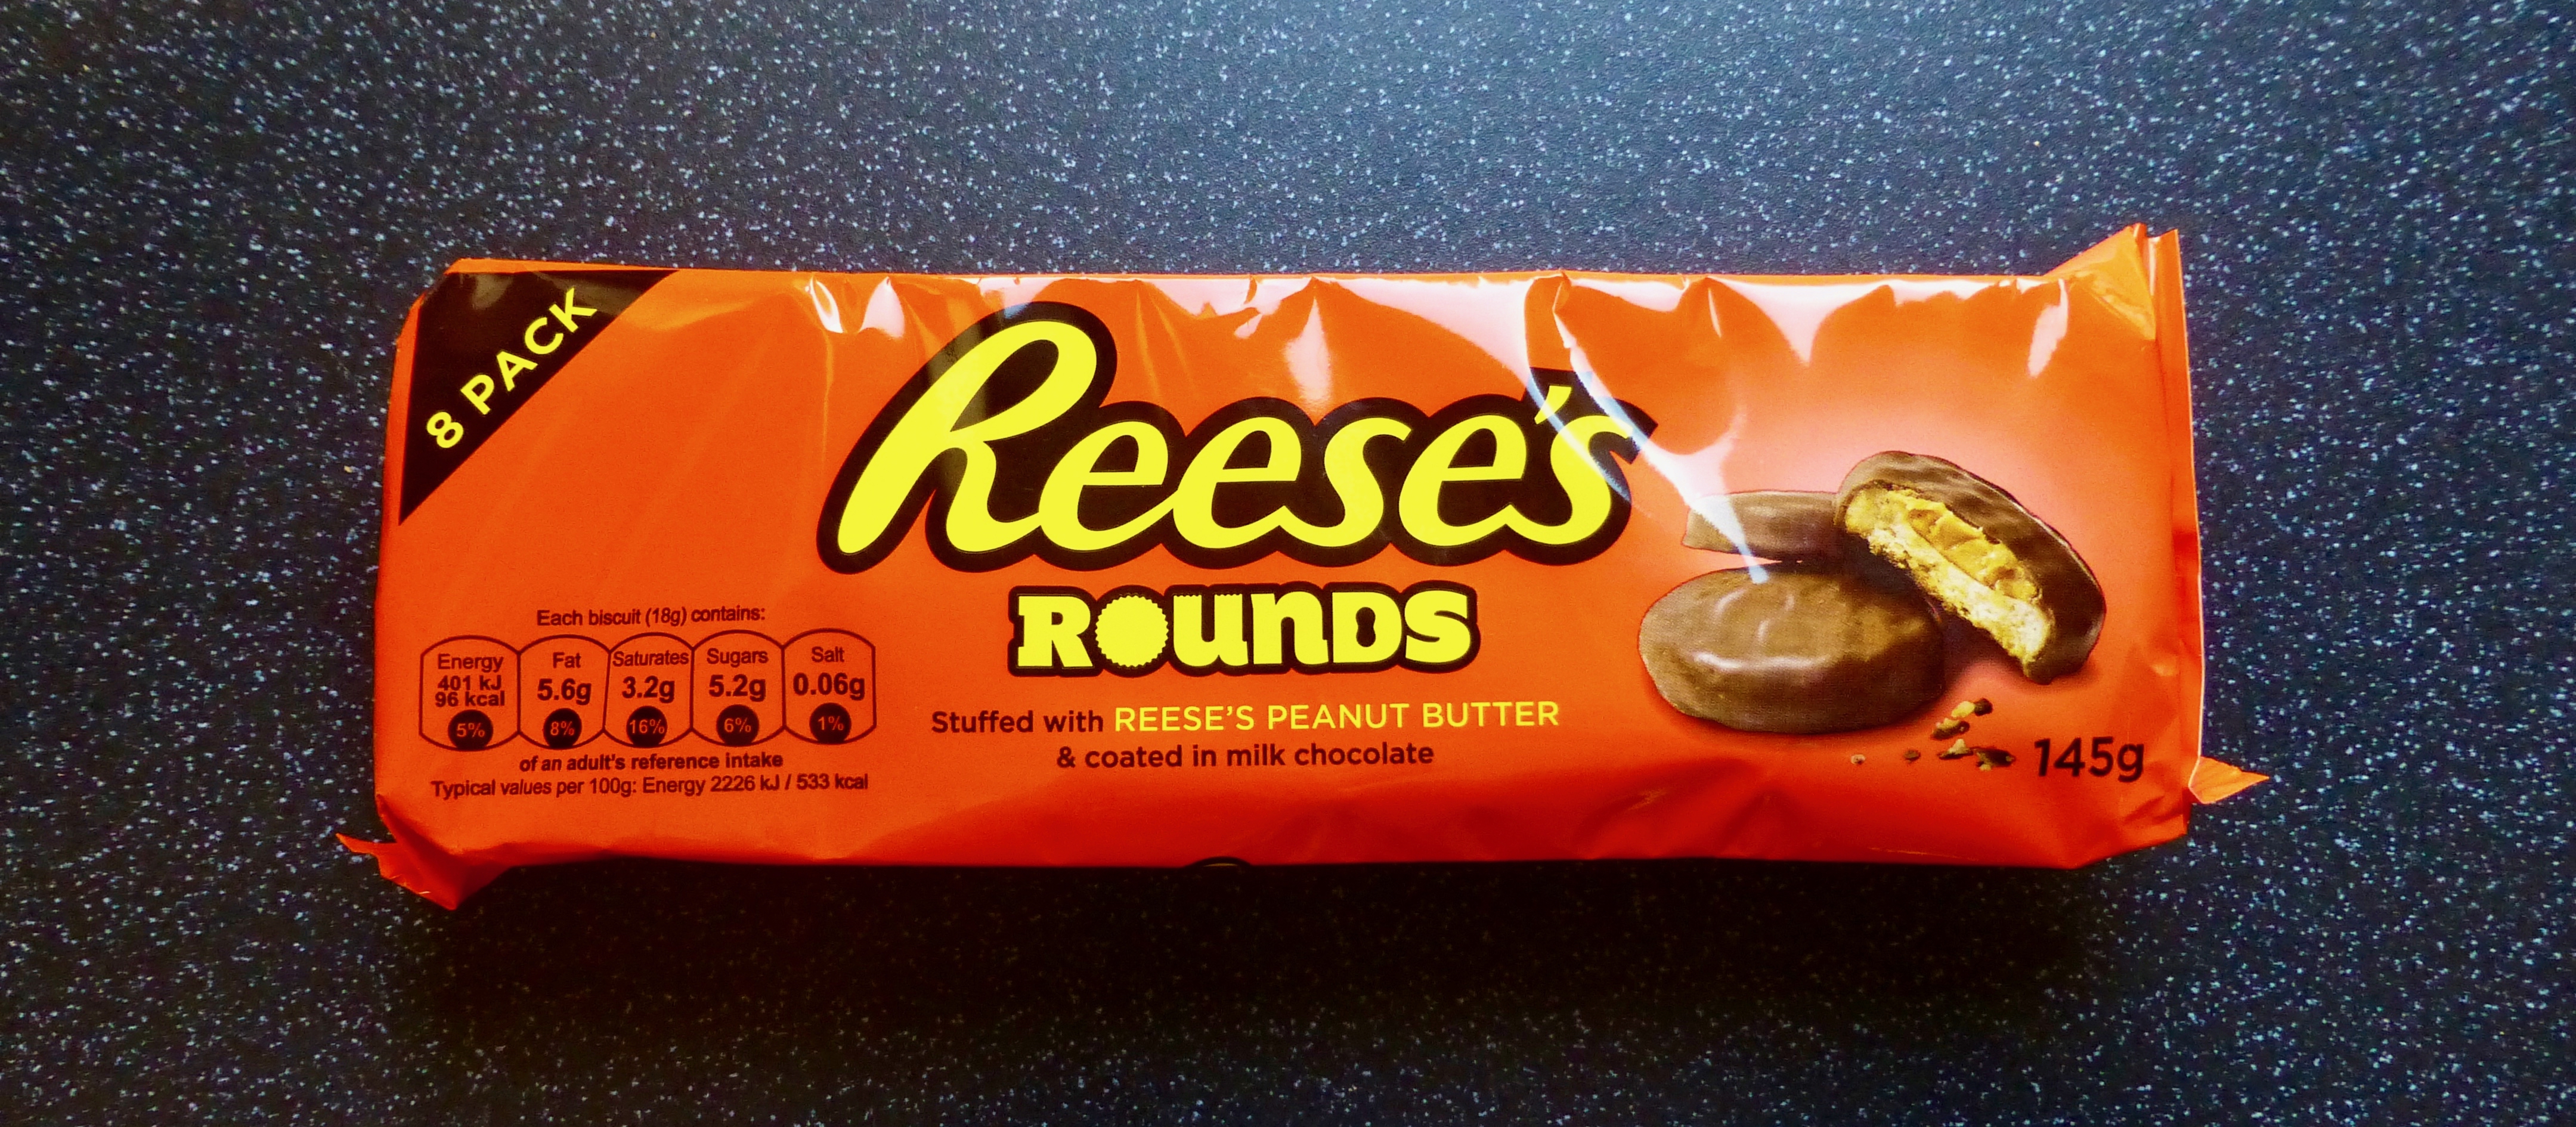 Reese's Rounds 